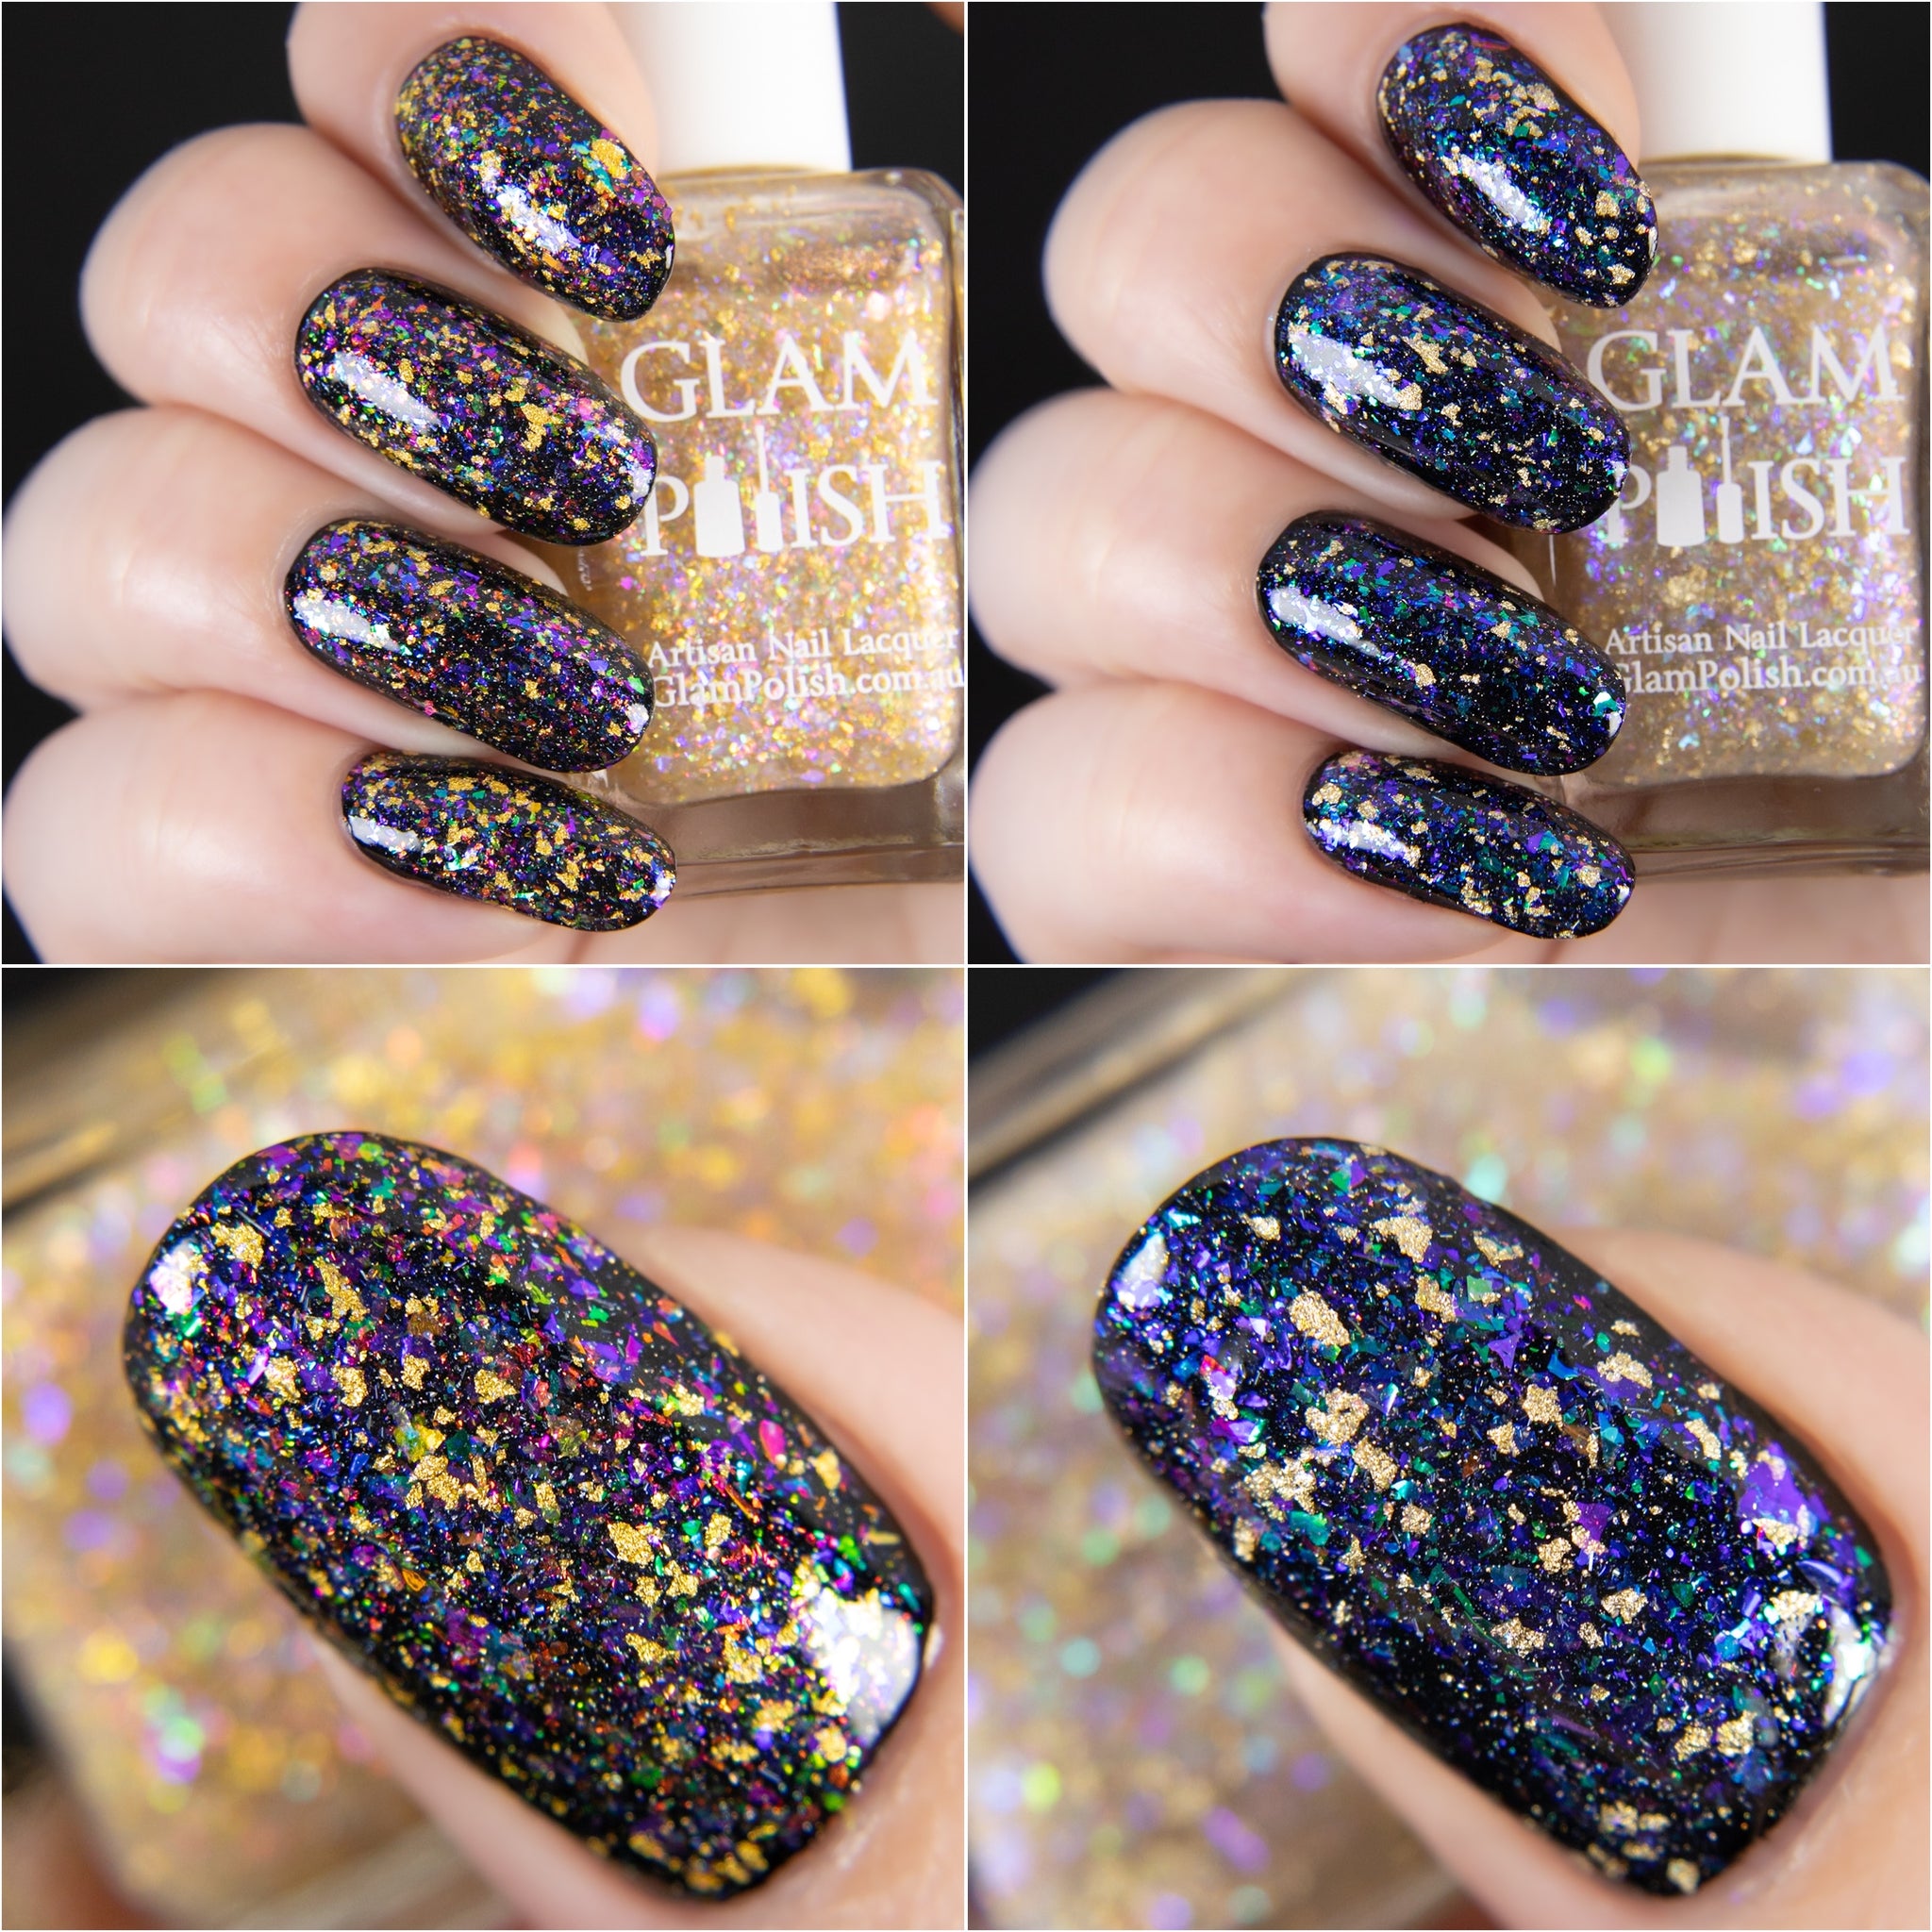 Best Glitter Nail Polish for Perfect Sparkly Nails